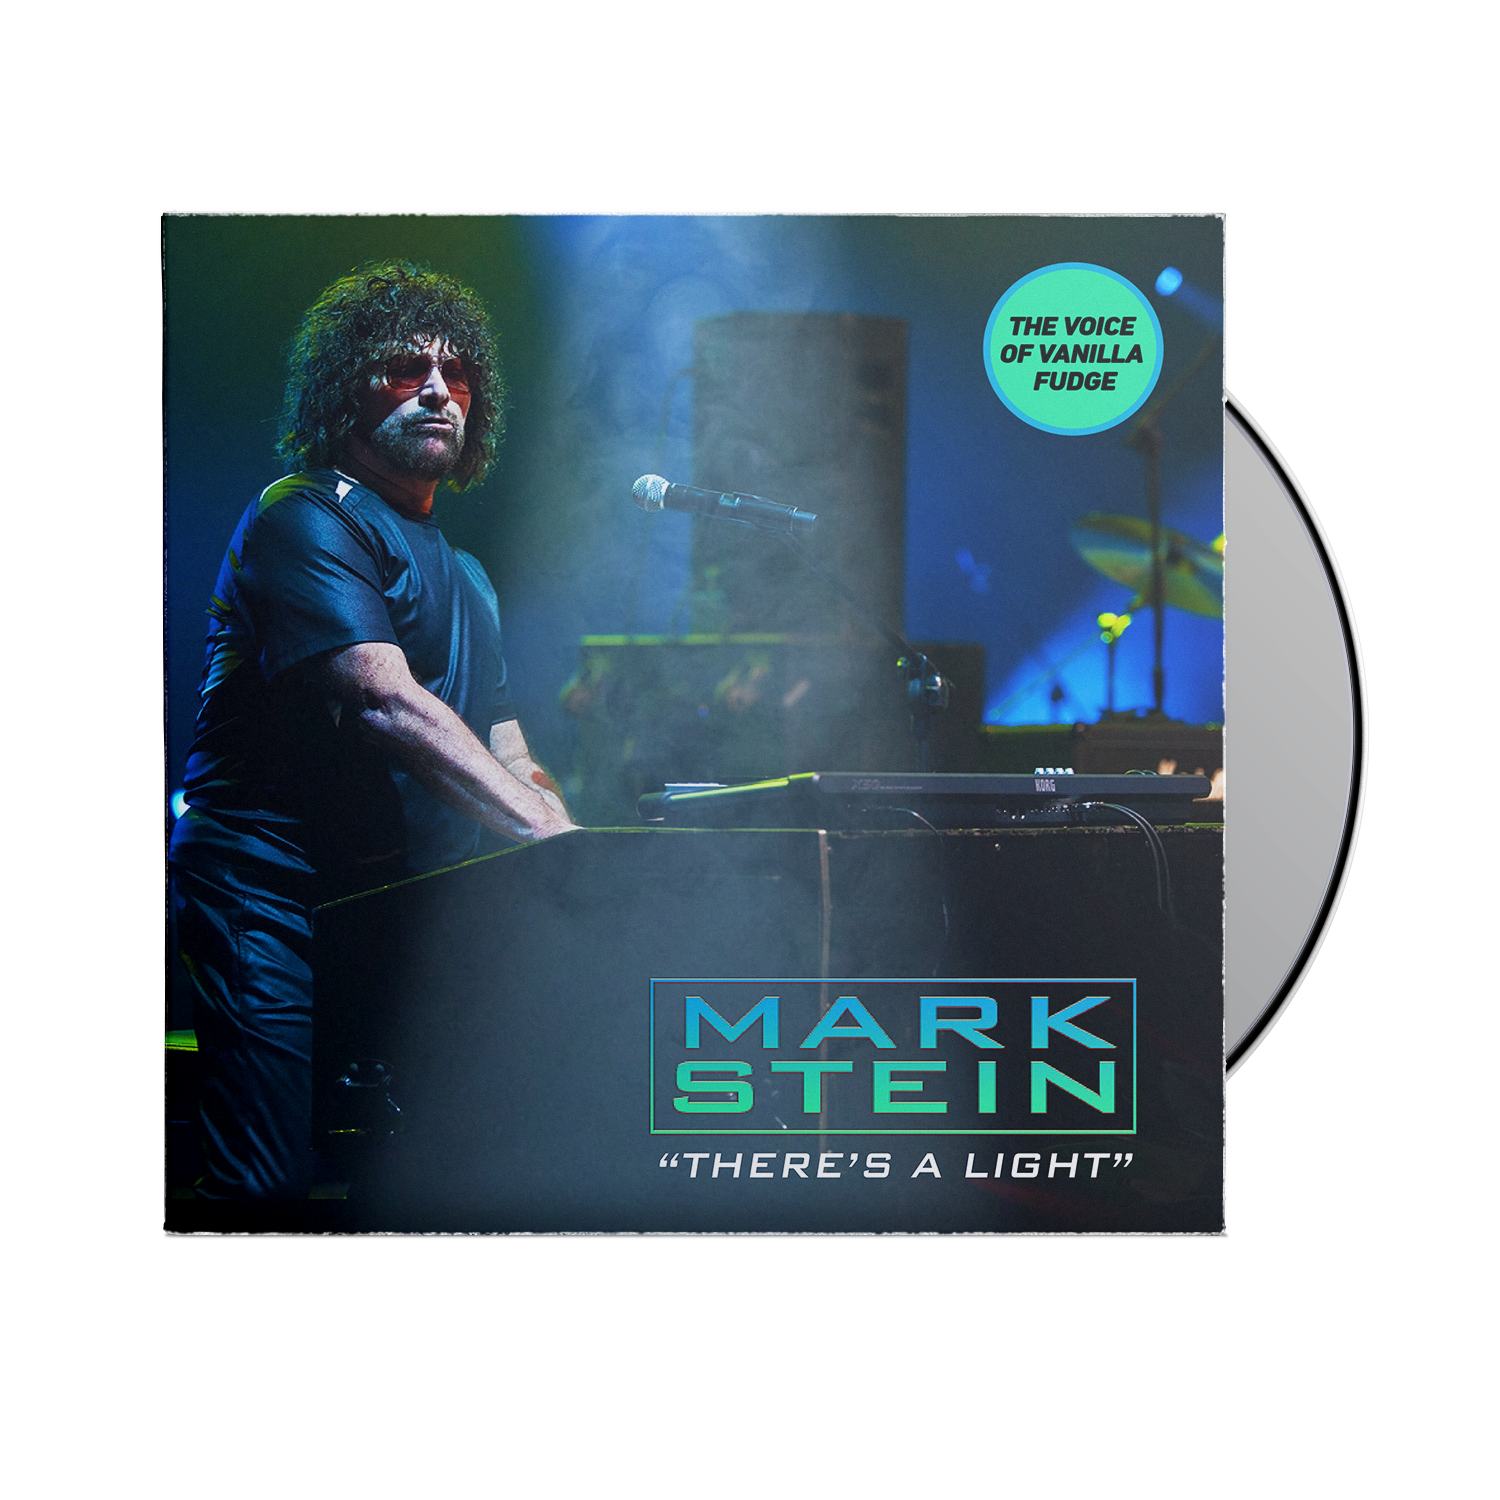 MARK STEIN 'THERE'S A LIGHT' LIMITED-EDITION CD BUNDLE (Signature Bracelet and Bandana)